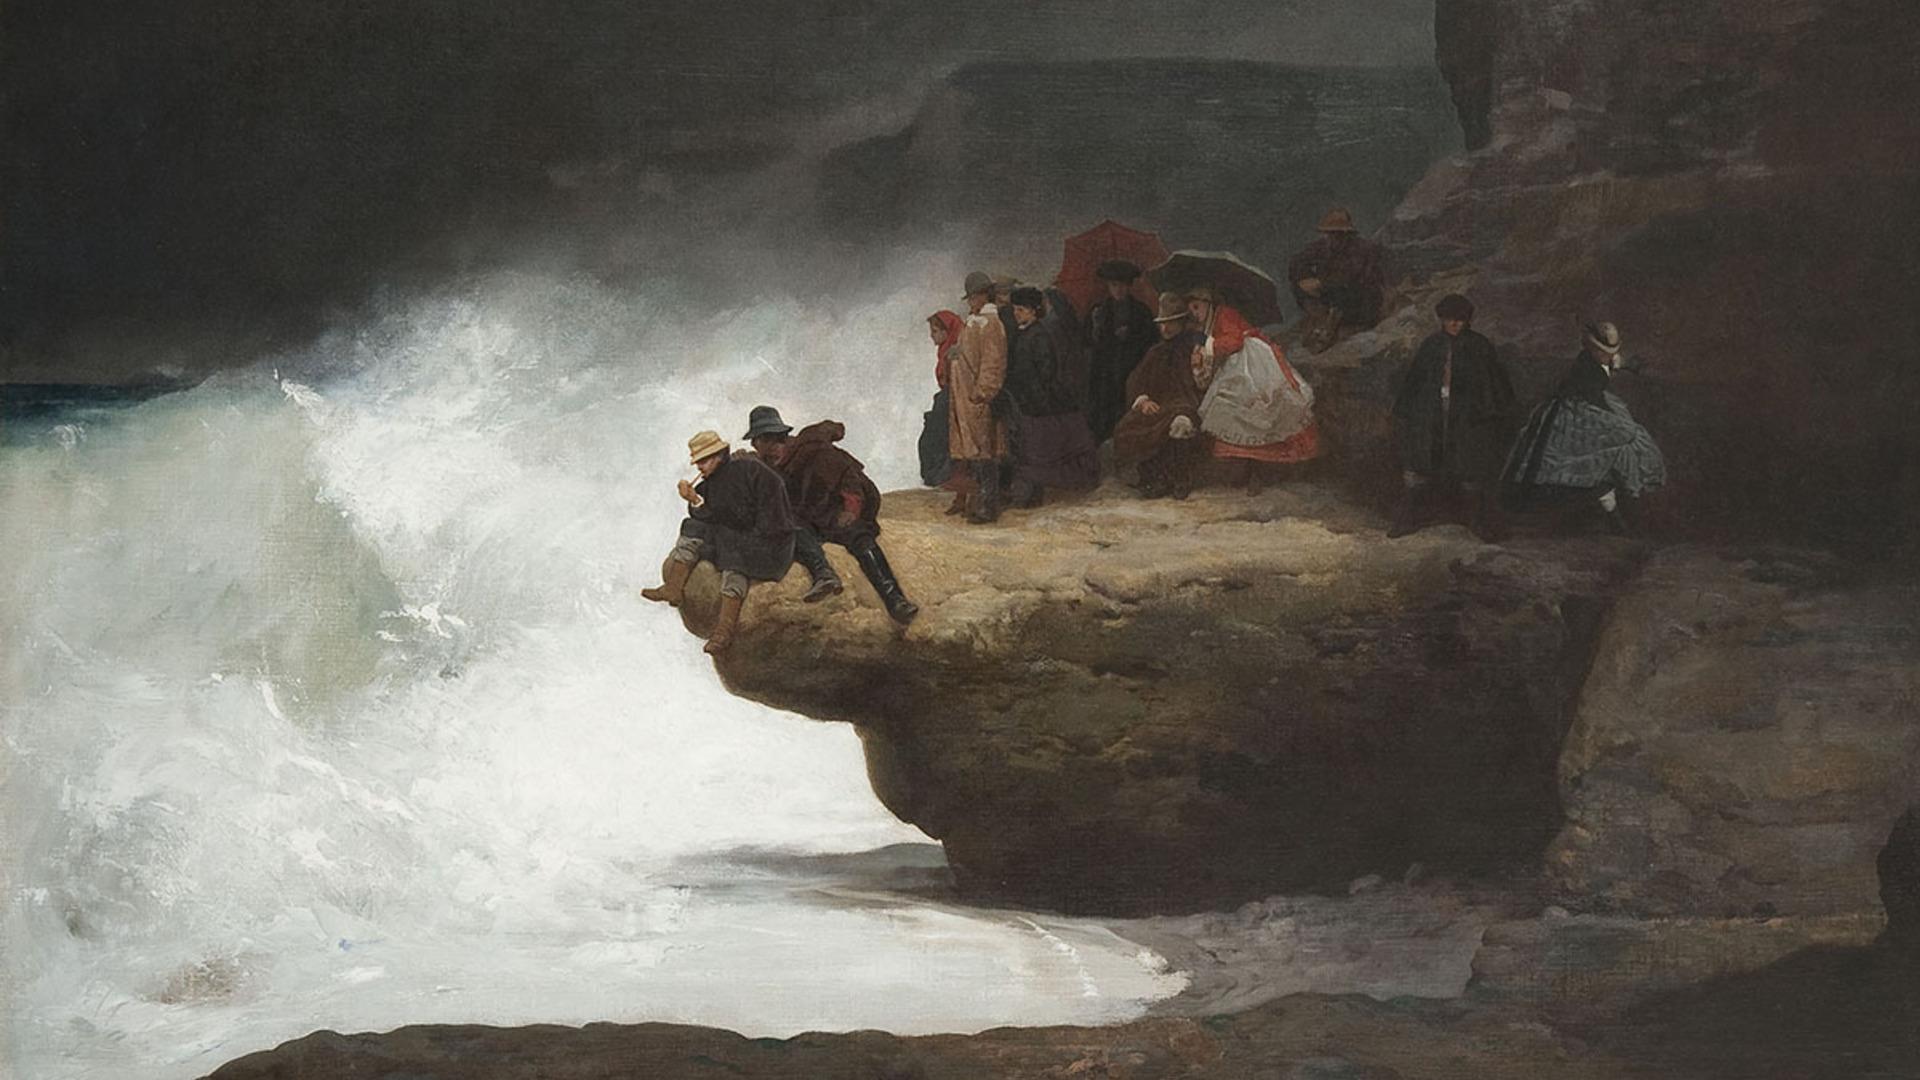 Jehan-Georges Vibert (French, 1840–1902), Figures on Rocks at the Edge of the Sea, 1867, oil on canvas. Gift of Mr. and Mrs. Noah L. Butkin, 2009.045.110